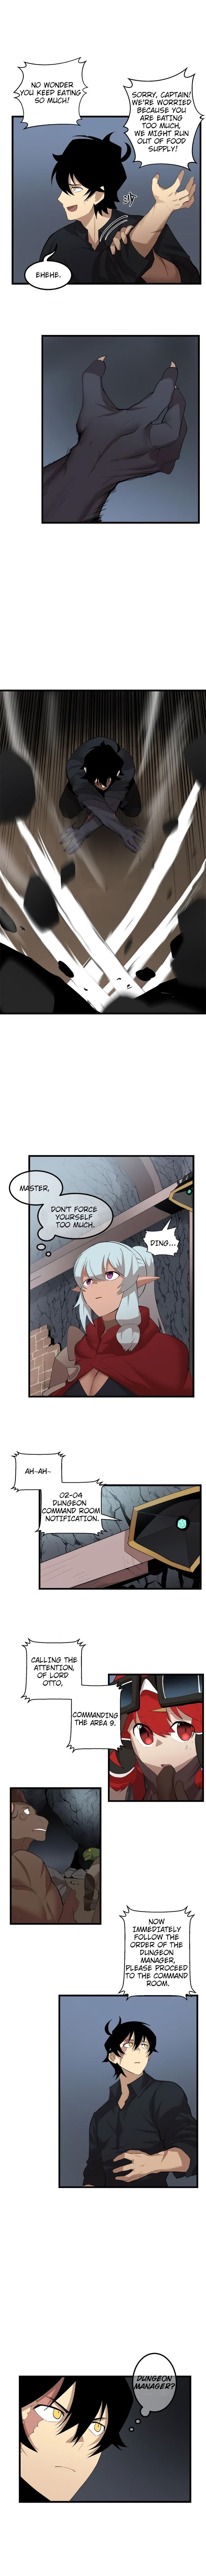 The Dungeon Master Chapter 78 Page 6